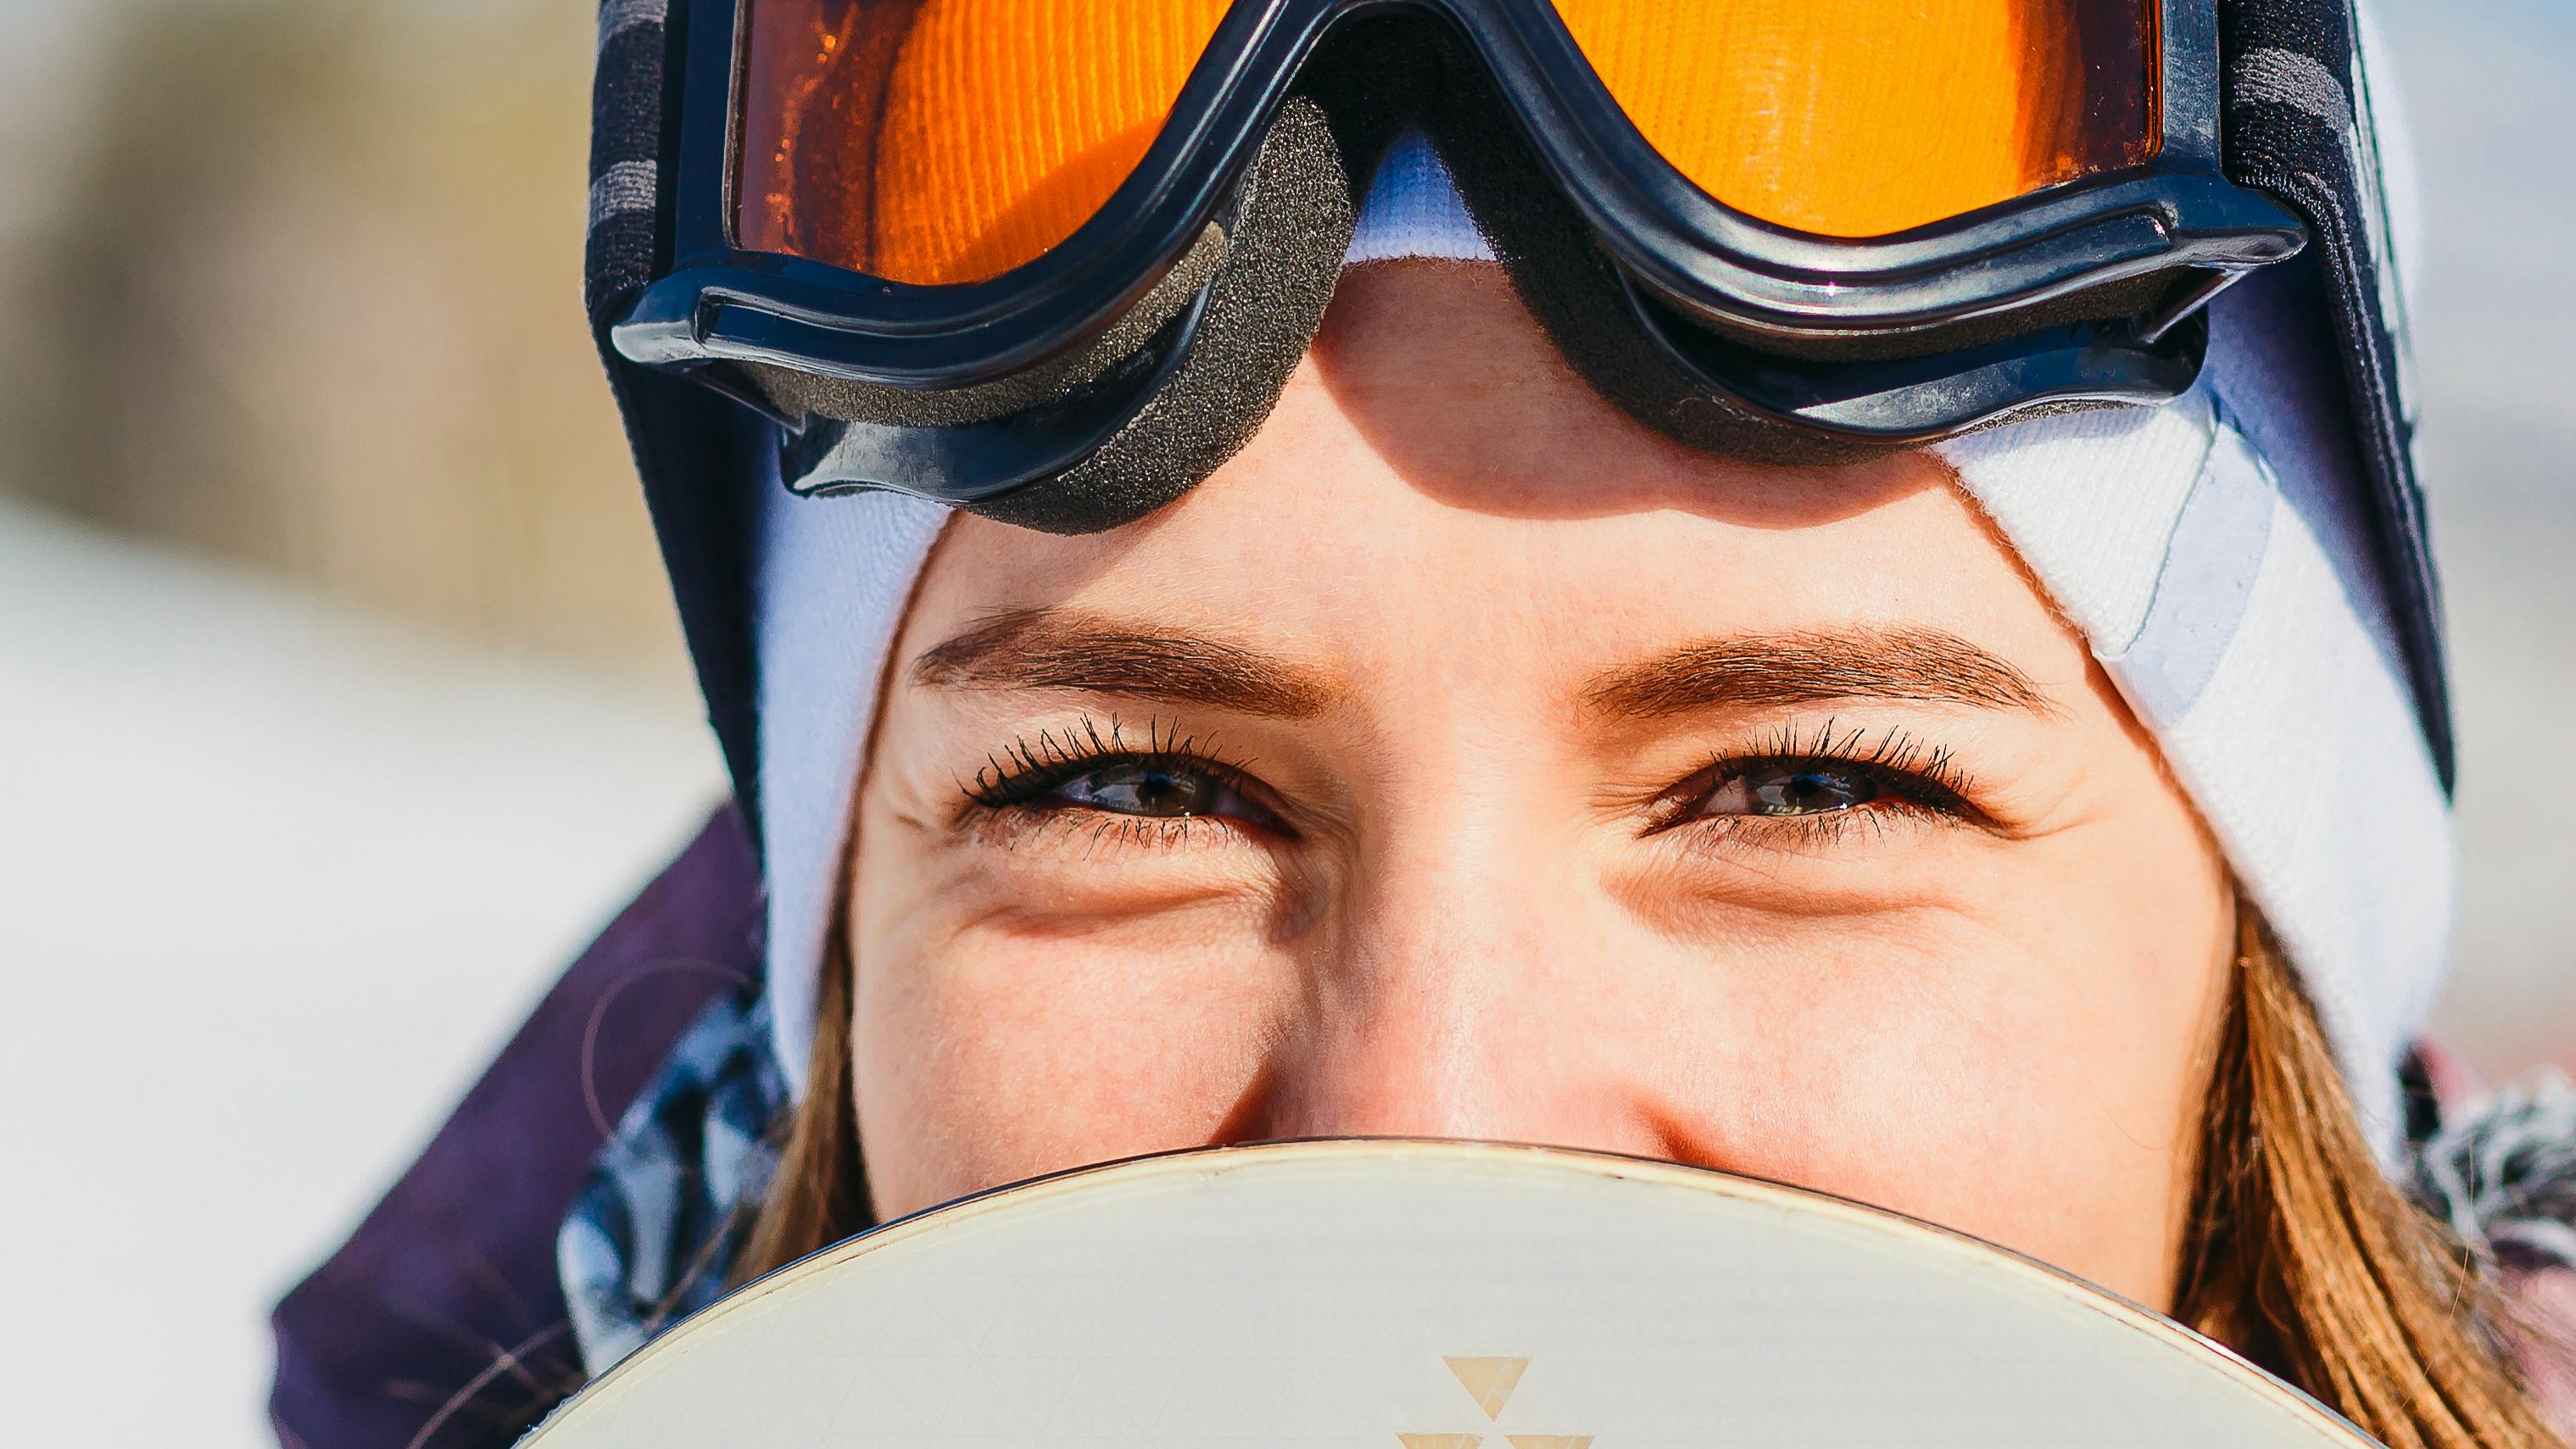 A snowboarder with goggles on her head smiling behind her snowboard.